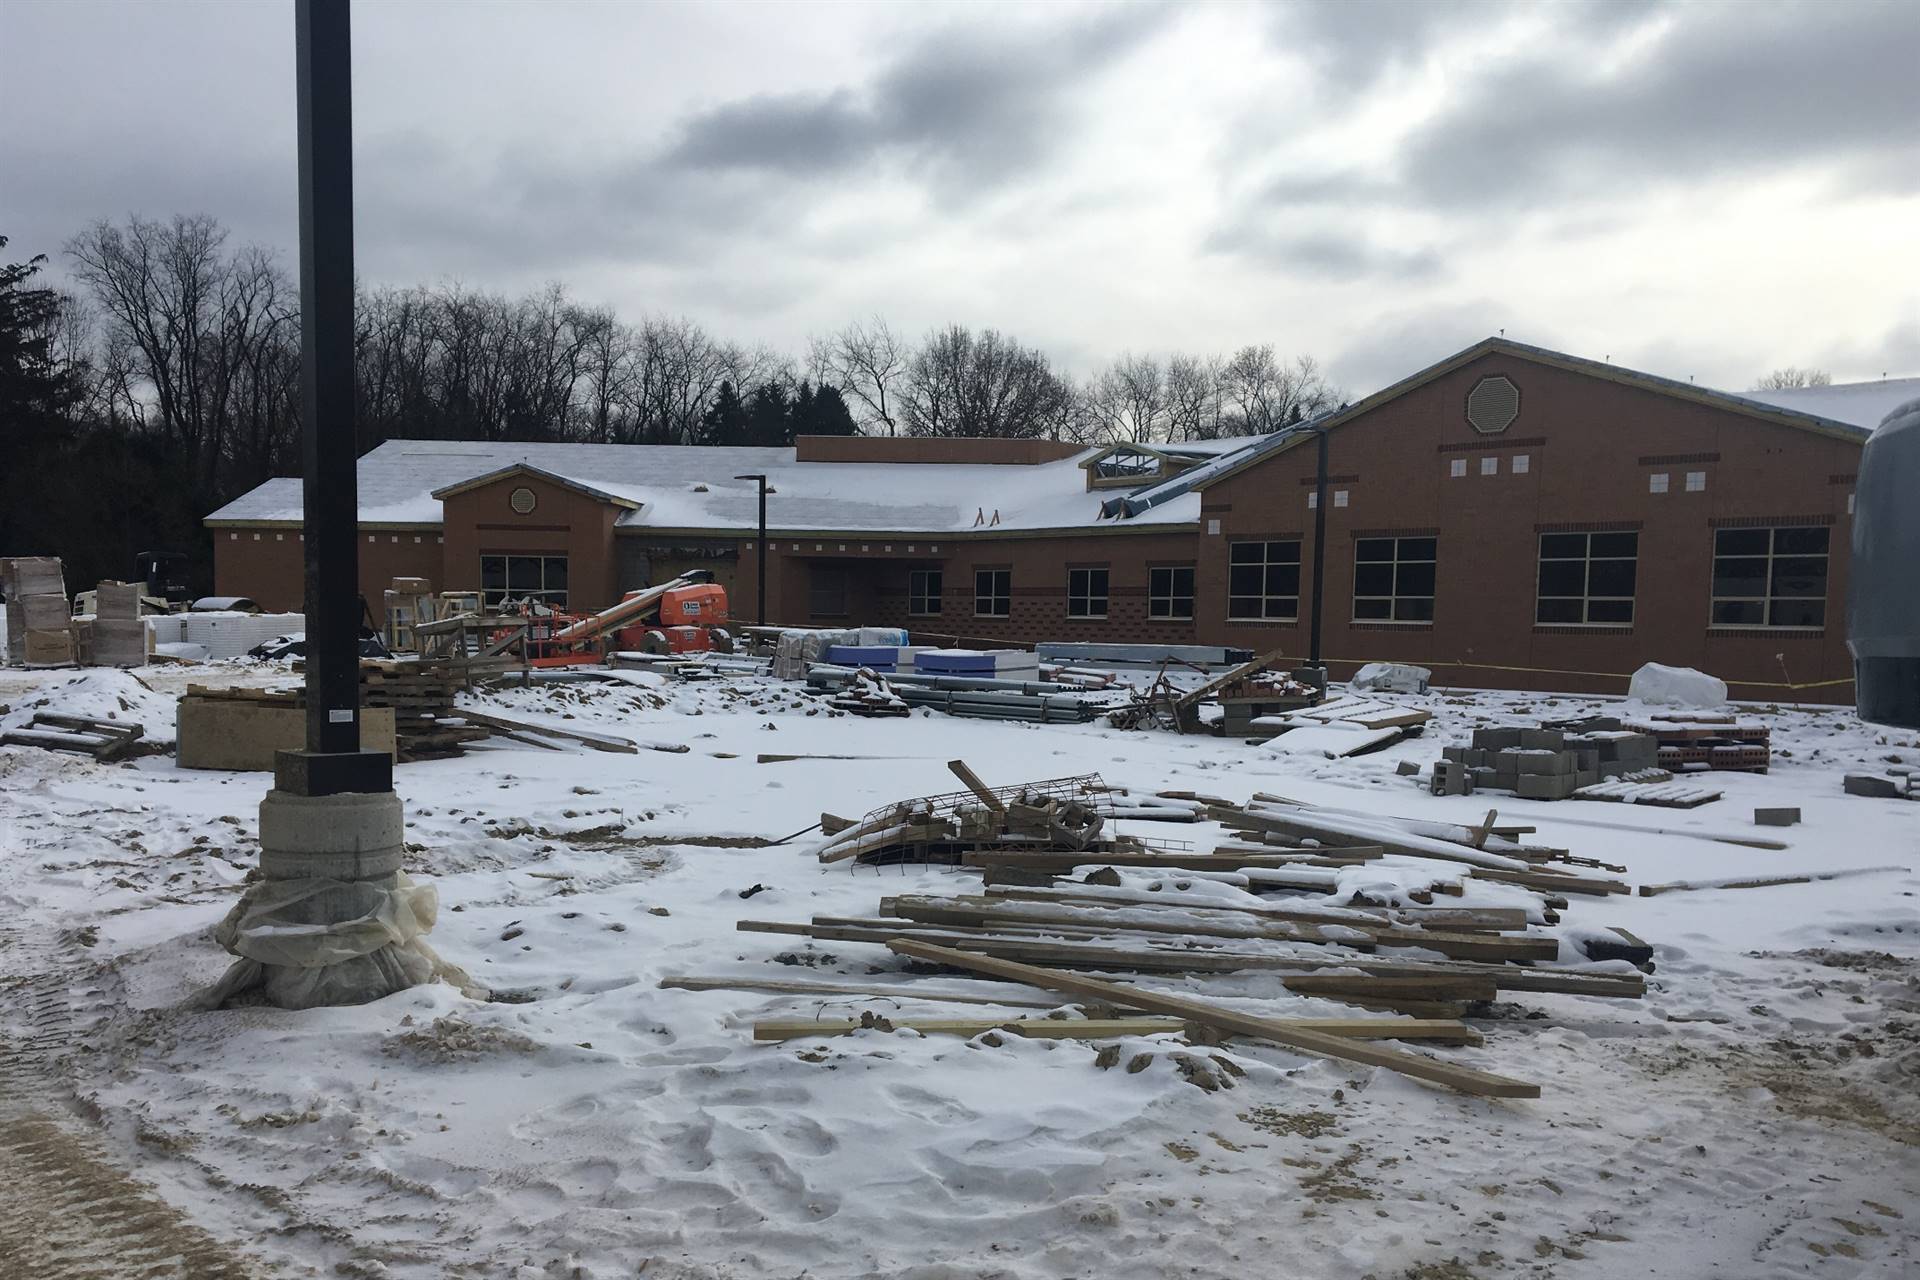 Scott Primary School building with construction material and snow on the ground